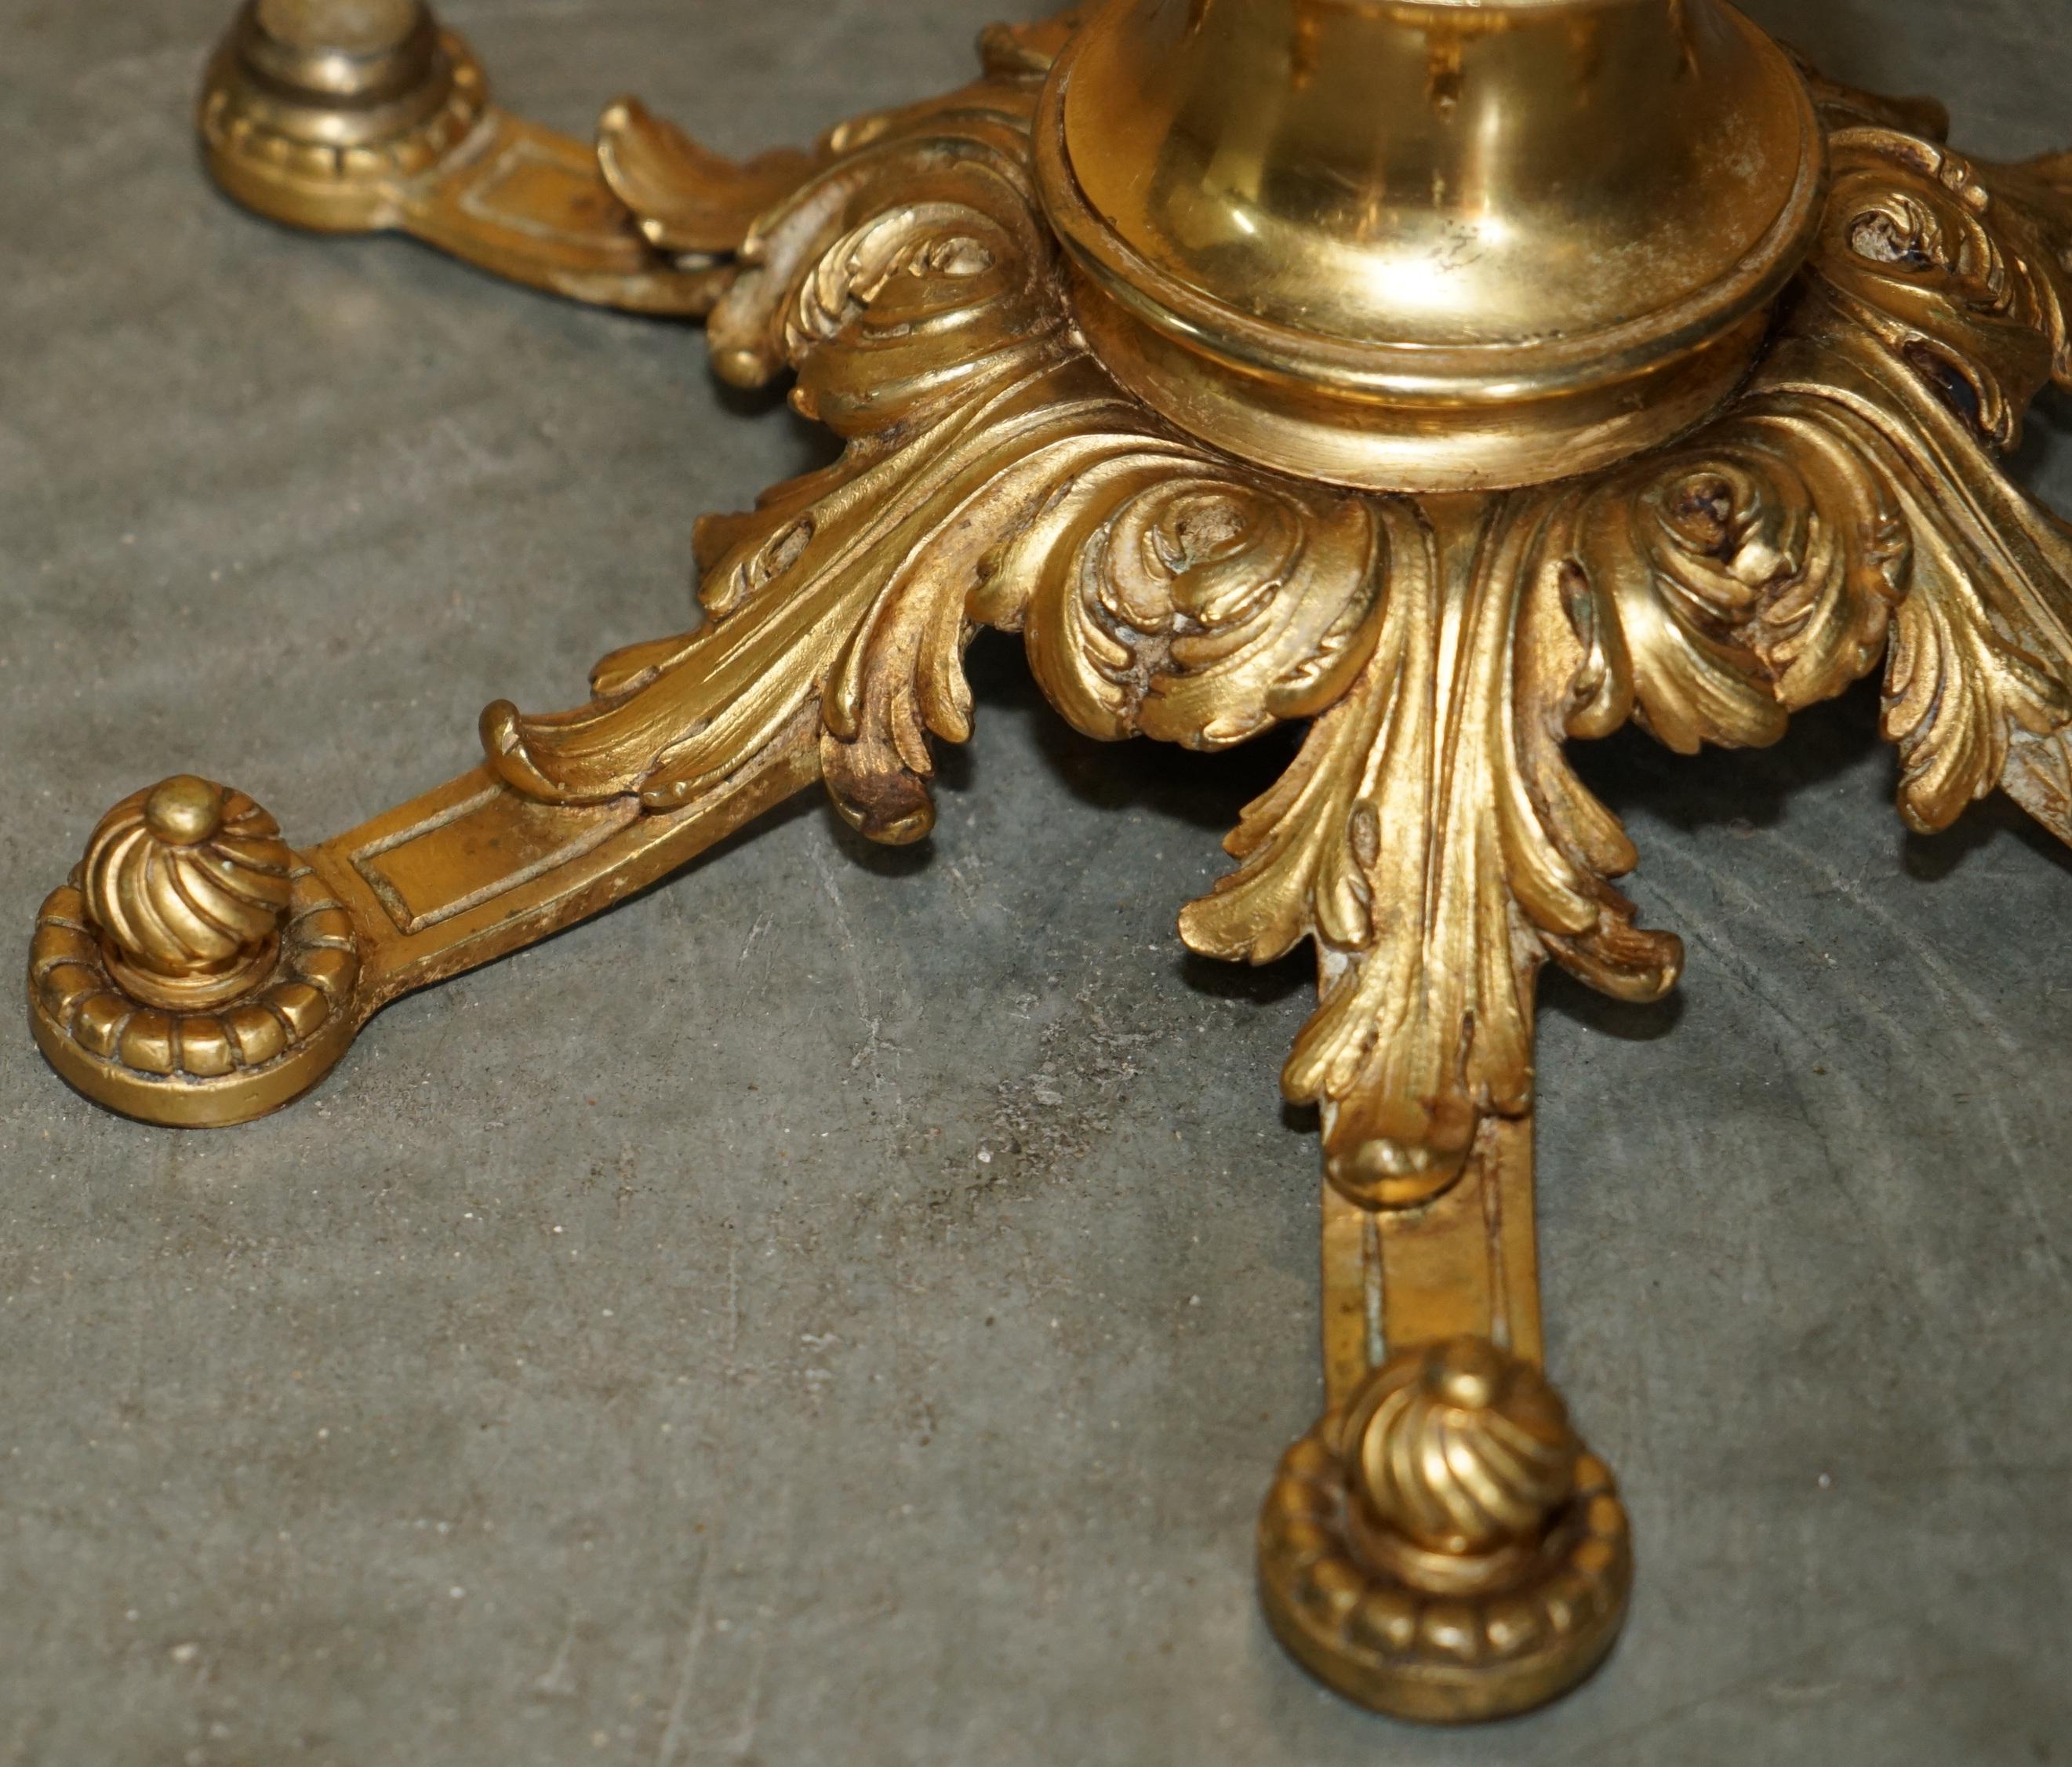 EXQUISITE ANTIQUE CIRCA 1900 BRASS SiDE END LAMP TABLE WITH THICK MARBLE TOP For Sale 4